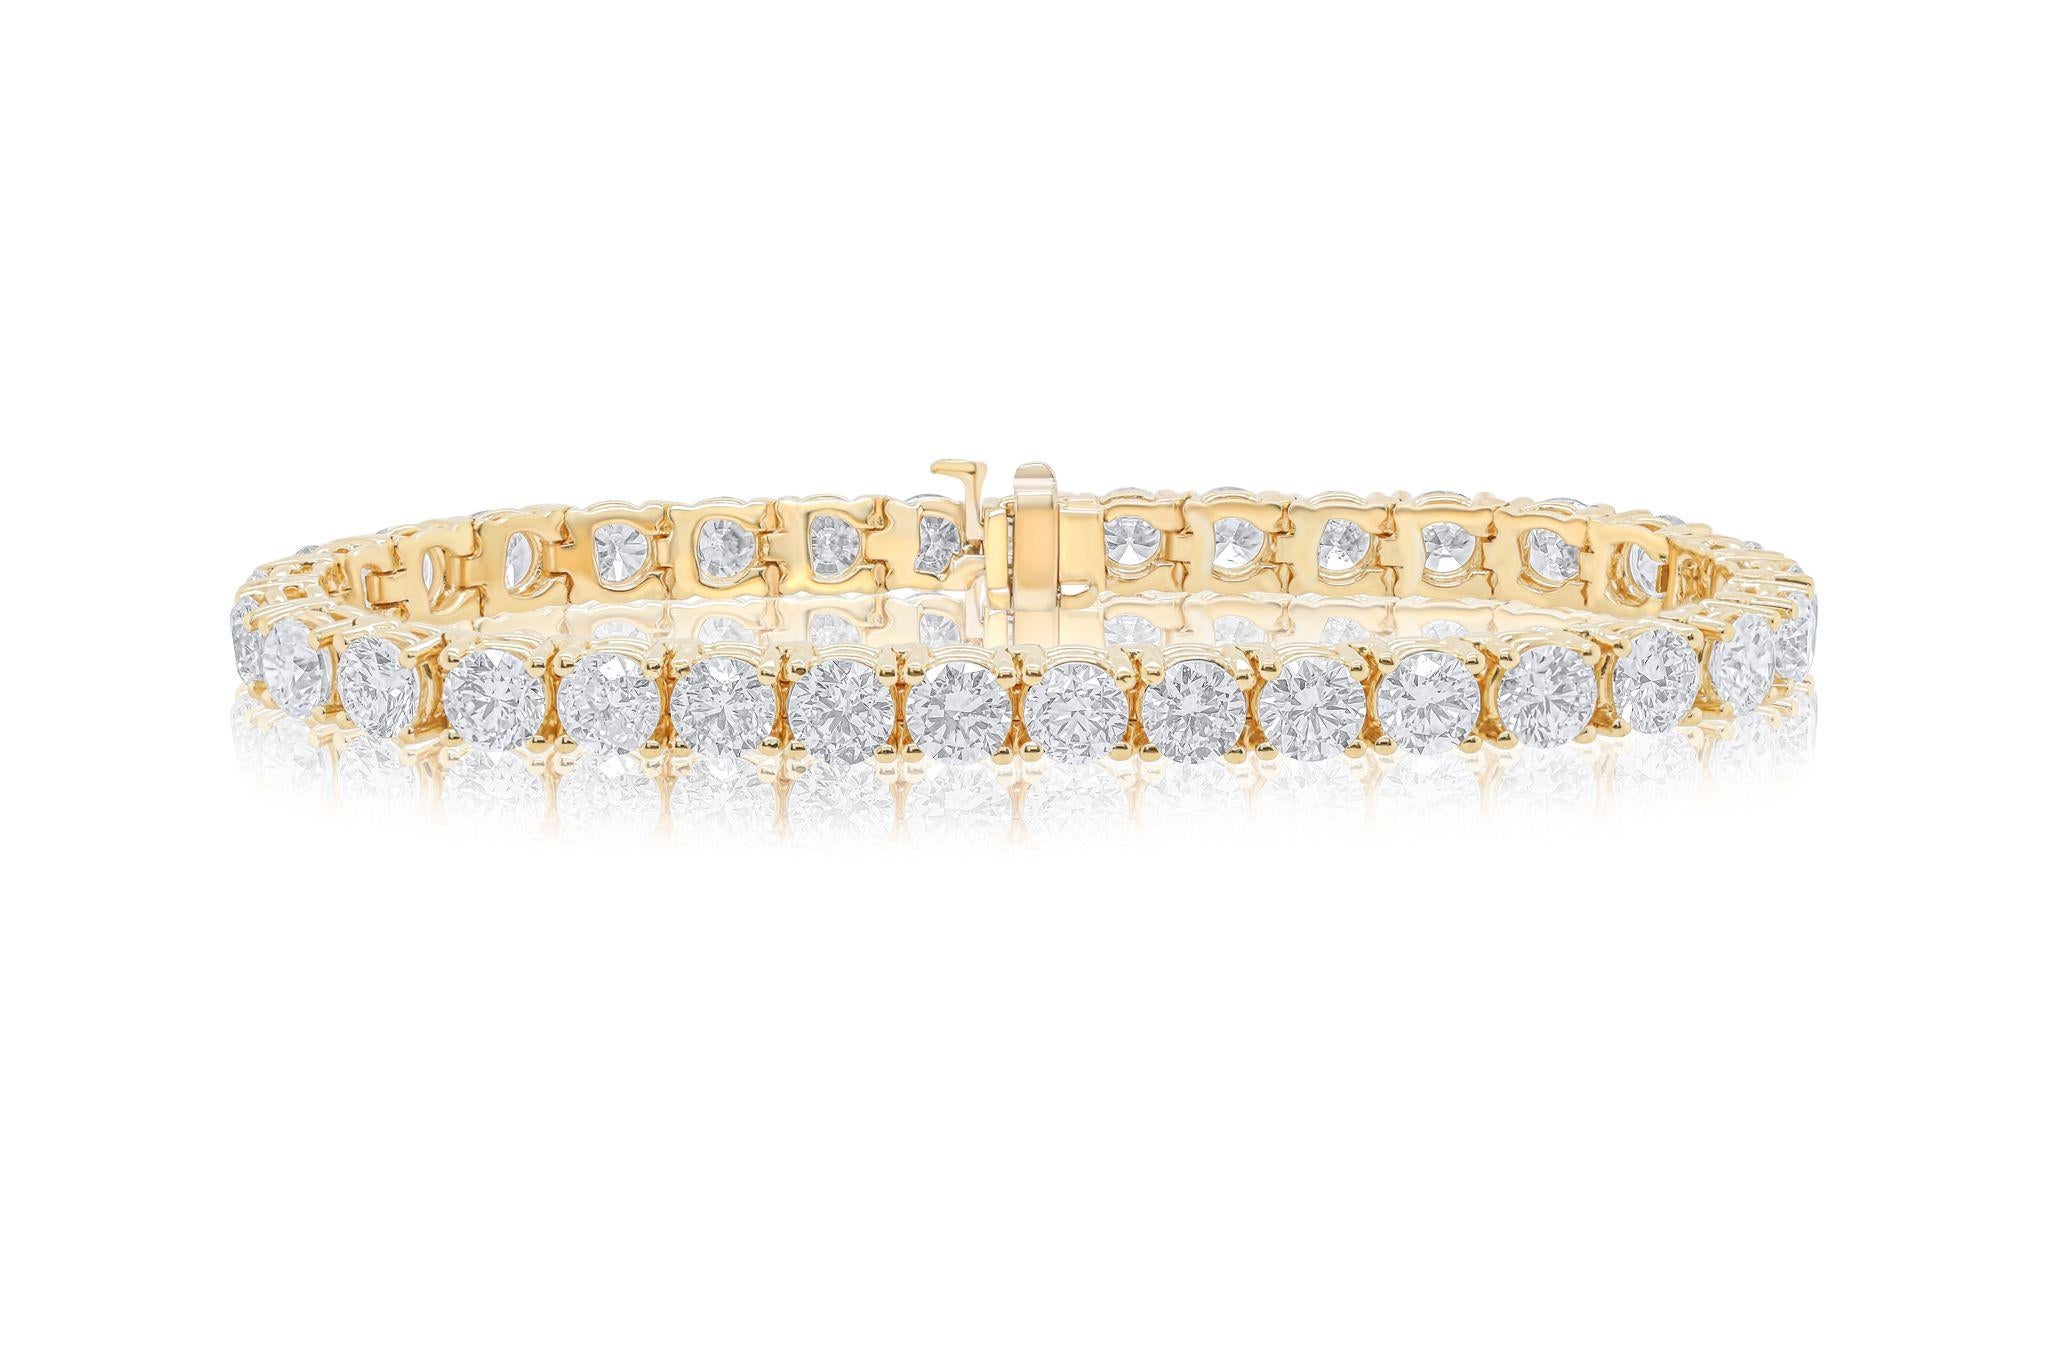 18 kt yellow gold 4 prong diamond tennis bracelet adorned with 16.30 cts tw of round diamonds (33 stones)
Diana M. is a leading supplier of top-quality fine jewelry for over 35 years.
Diana M is one-stop shop for all your jewelry shopping, carrying